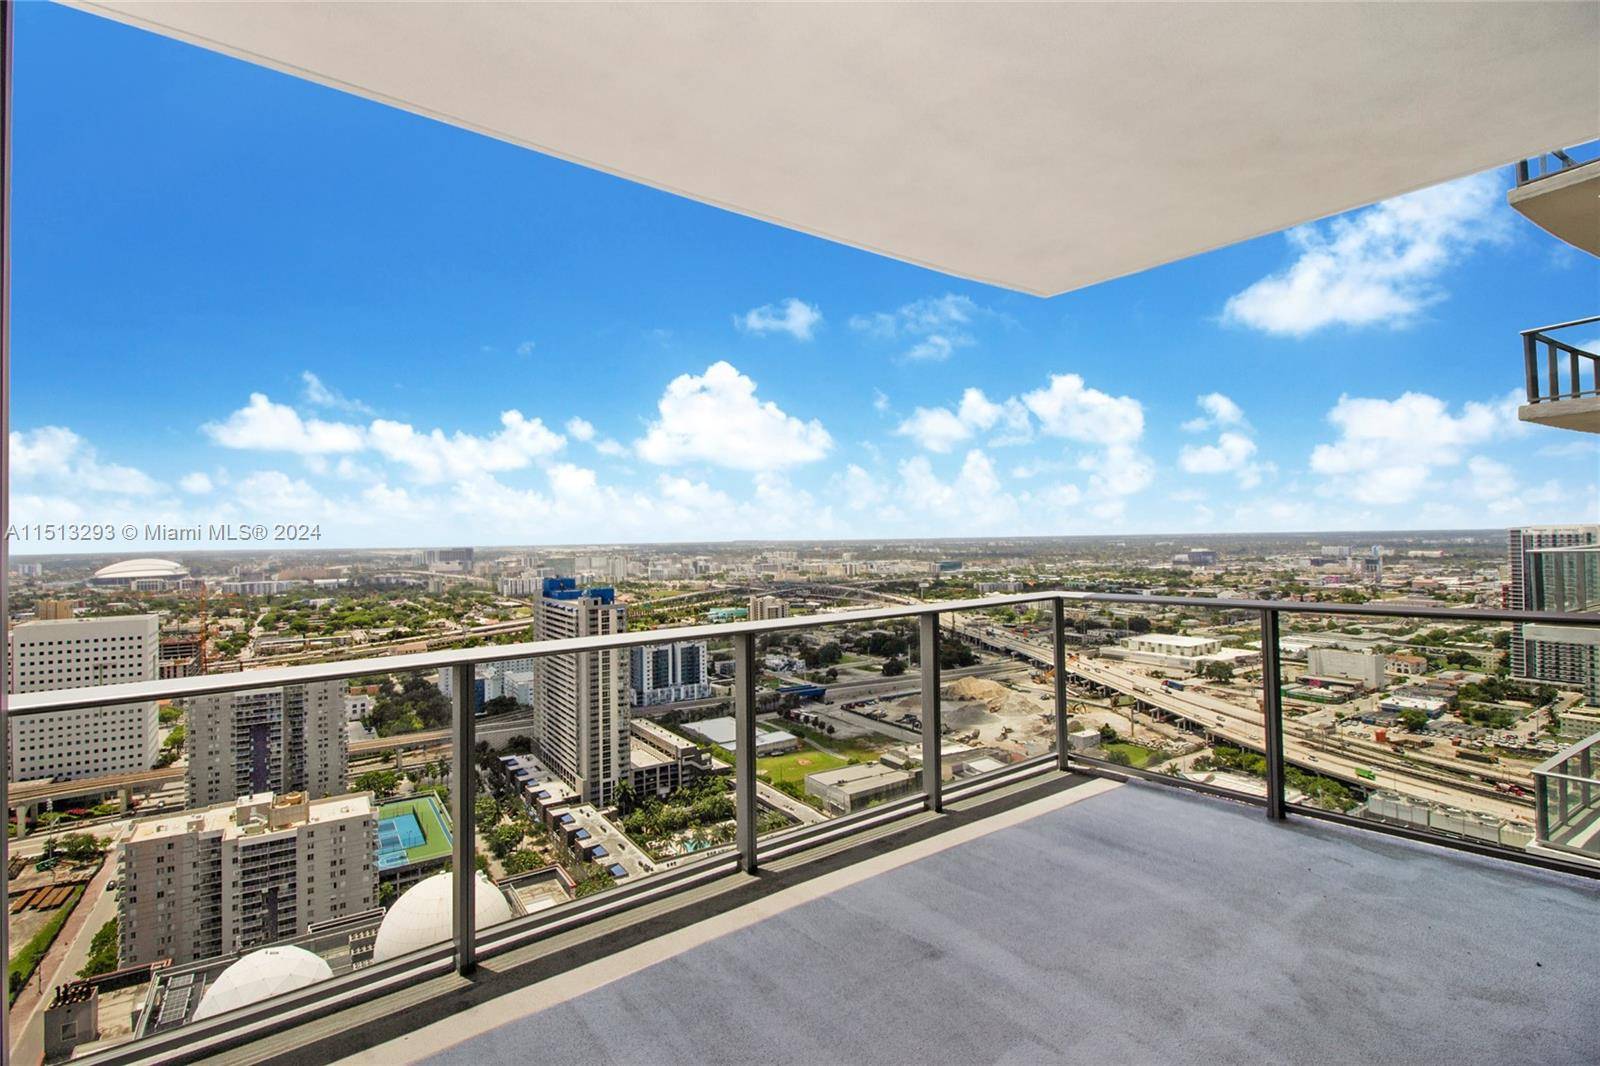 2 beds plus den 3 baths. PARAMOUNT features unparalleled views and the most amenities building in the country, with access to 46 different amenities such as 5 pools, spa, outdoor ...